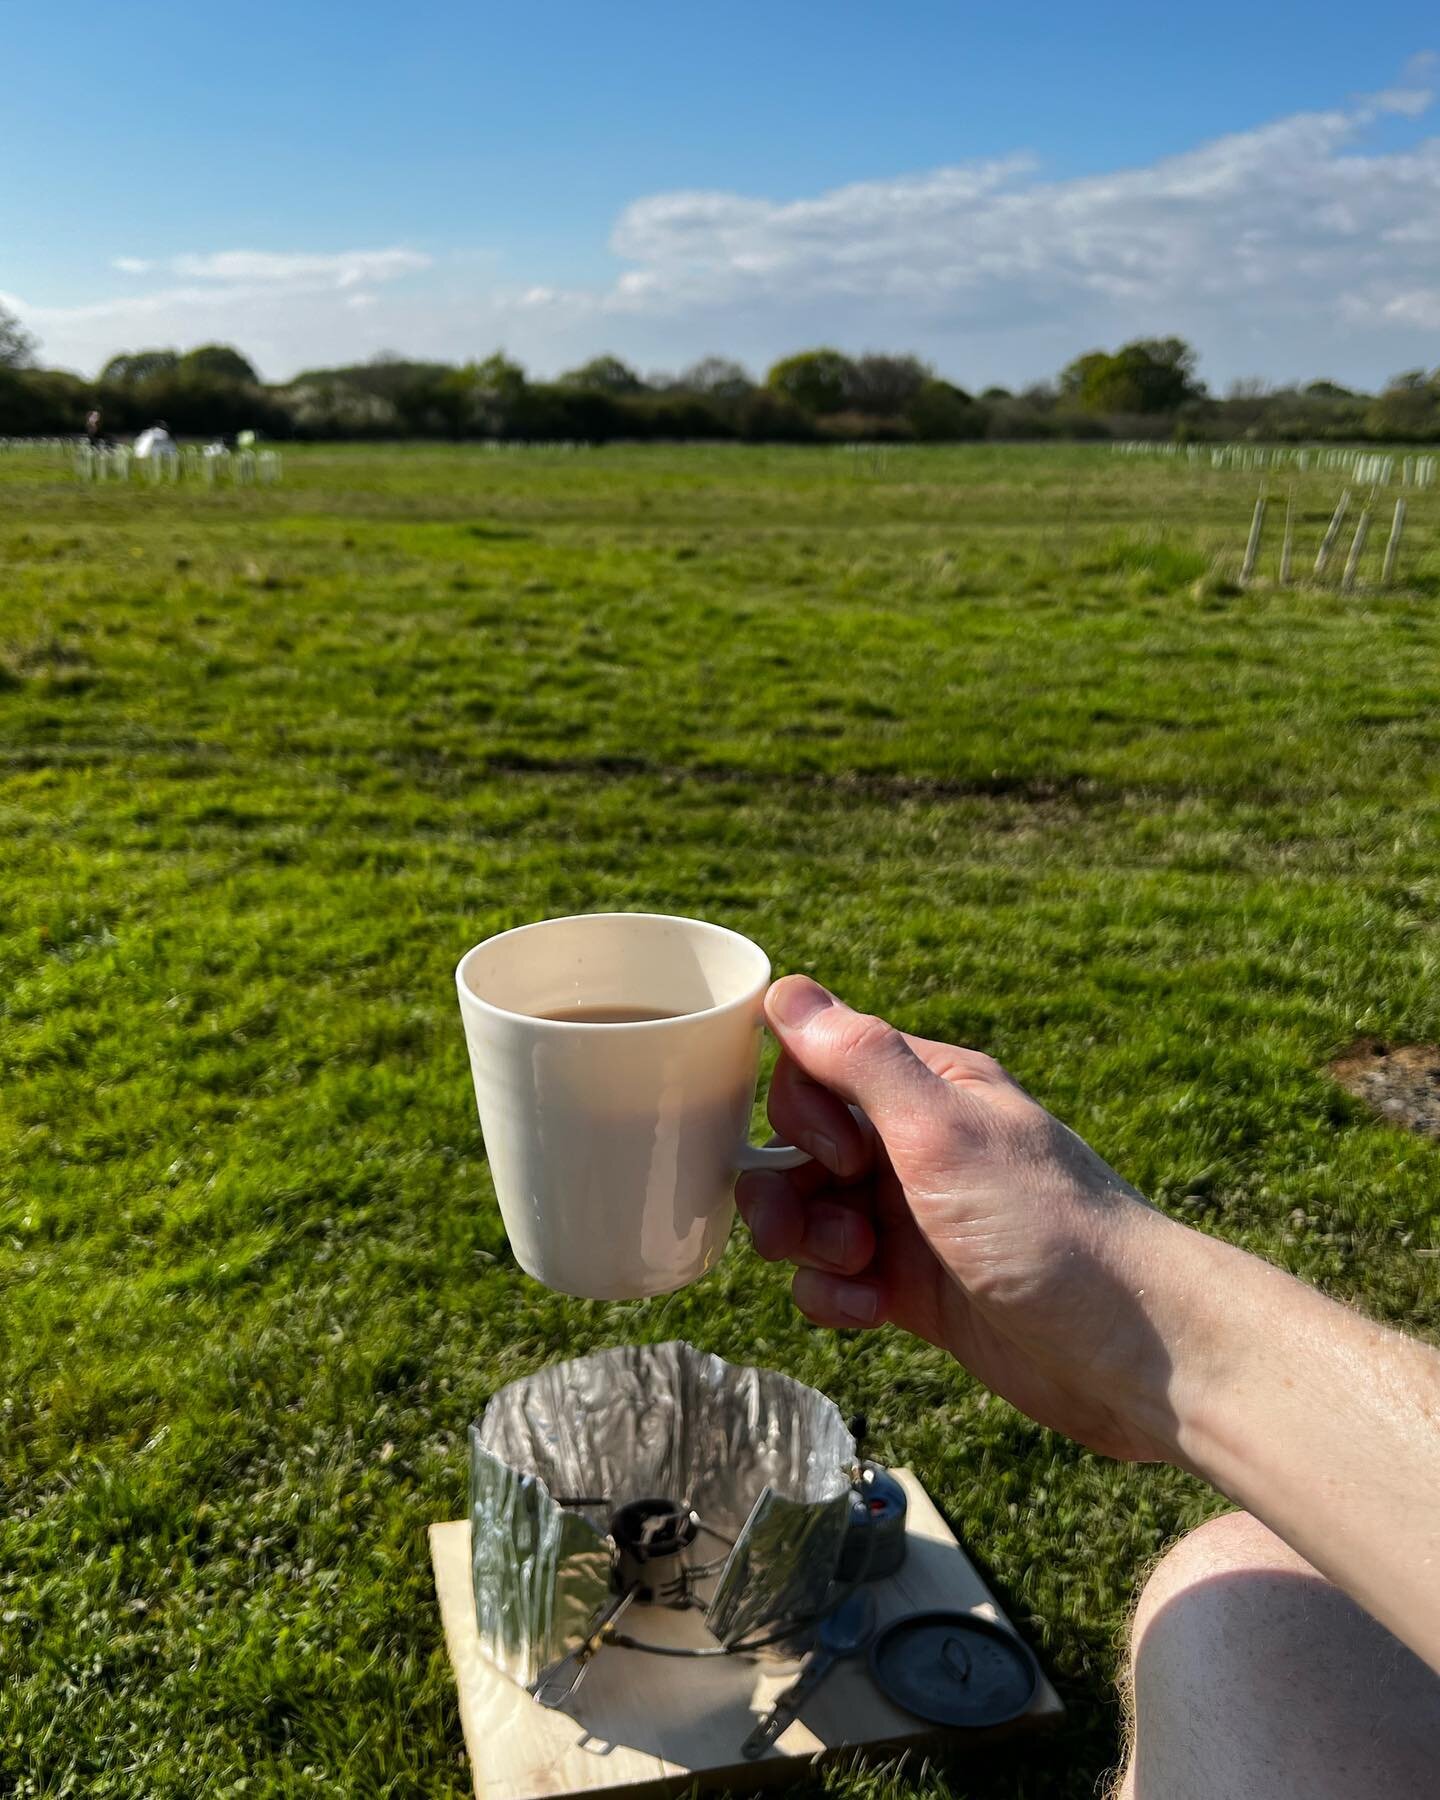 Out of town for a couple of days camping at @kneppwilding 🌳🌿 starting off with a tea in the sun in a lovely and translucent porcelain mug ☕️